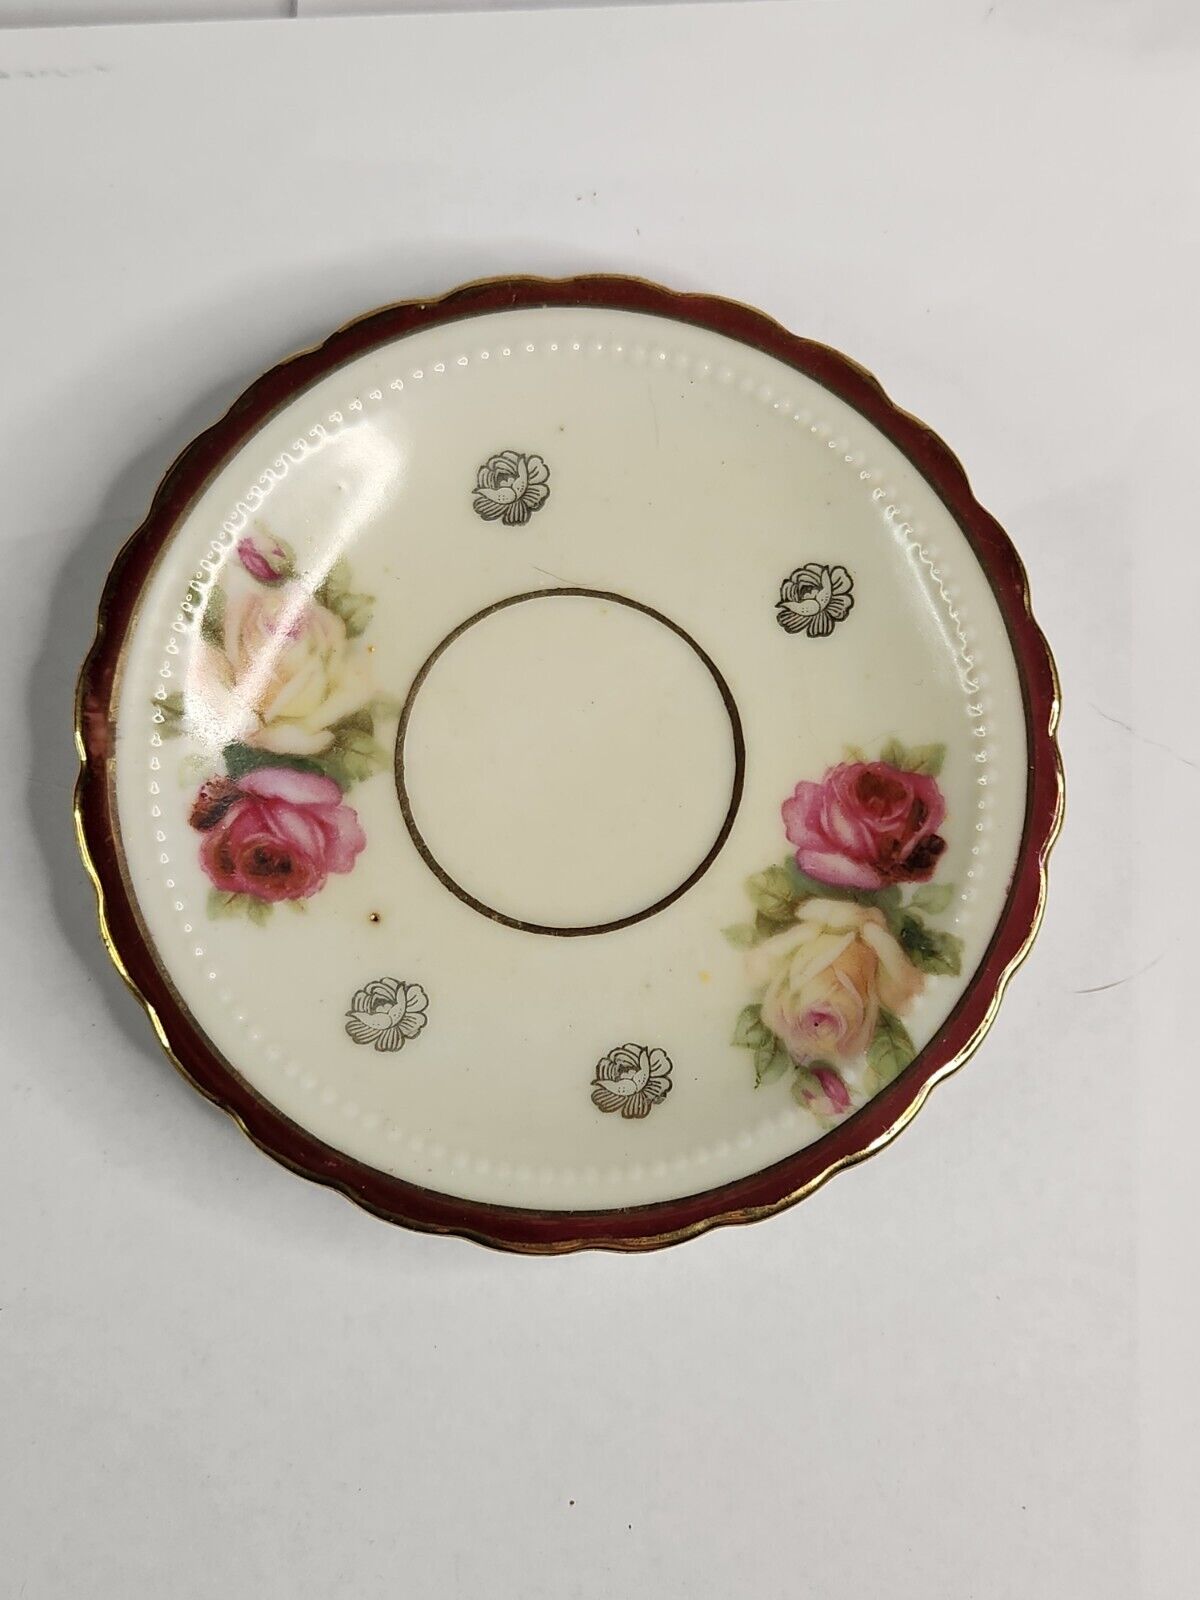 Antique hand-painted saucer unmarked 1910-25 